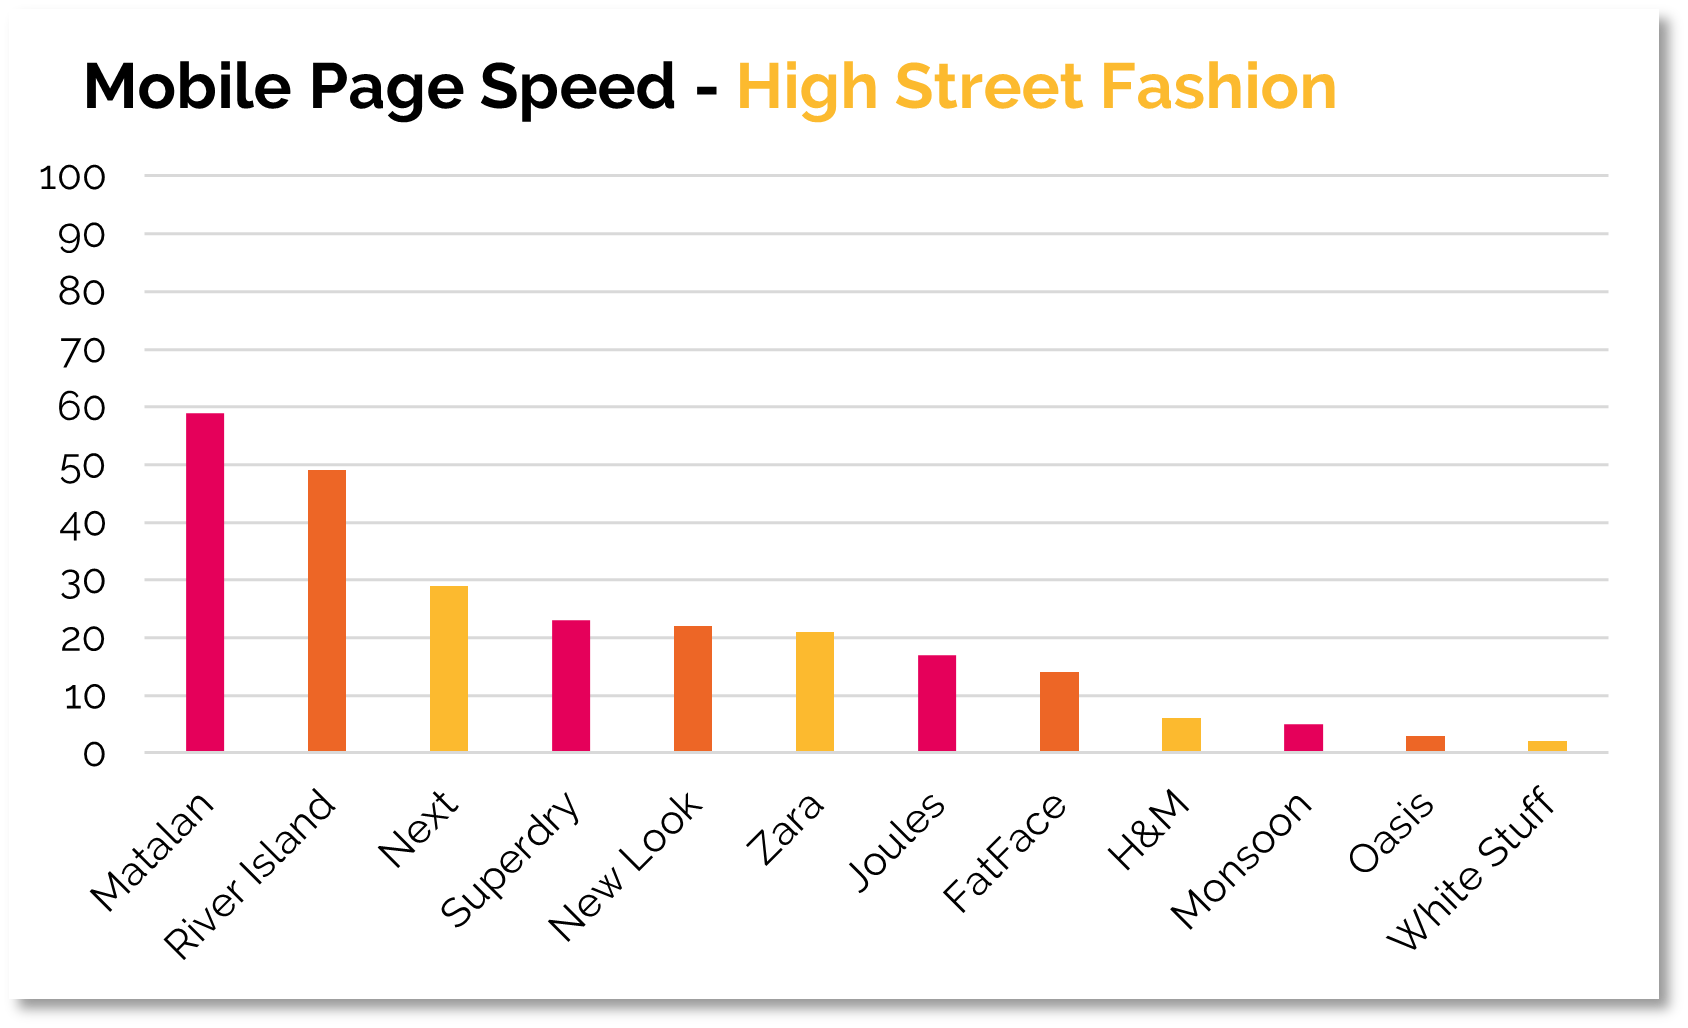 High Street Fashion - Mobile Site Speed